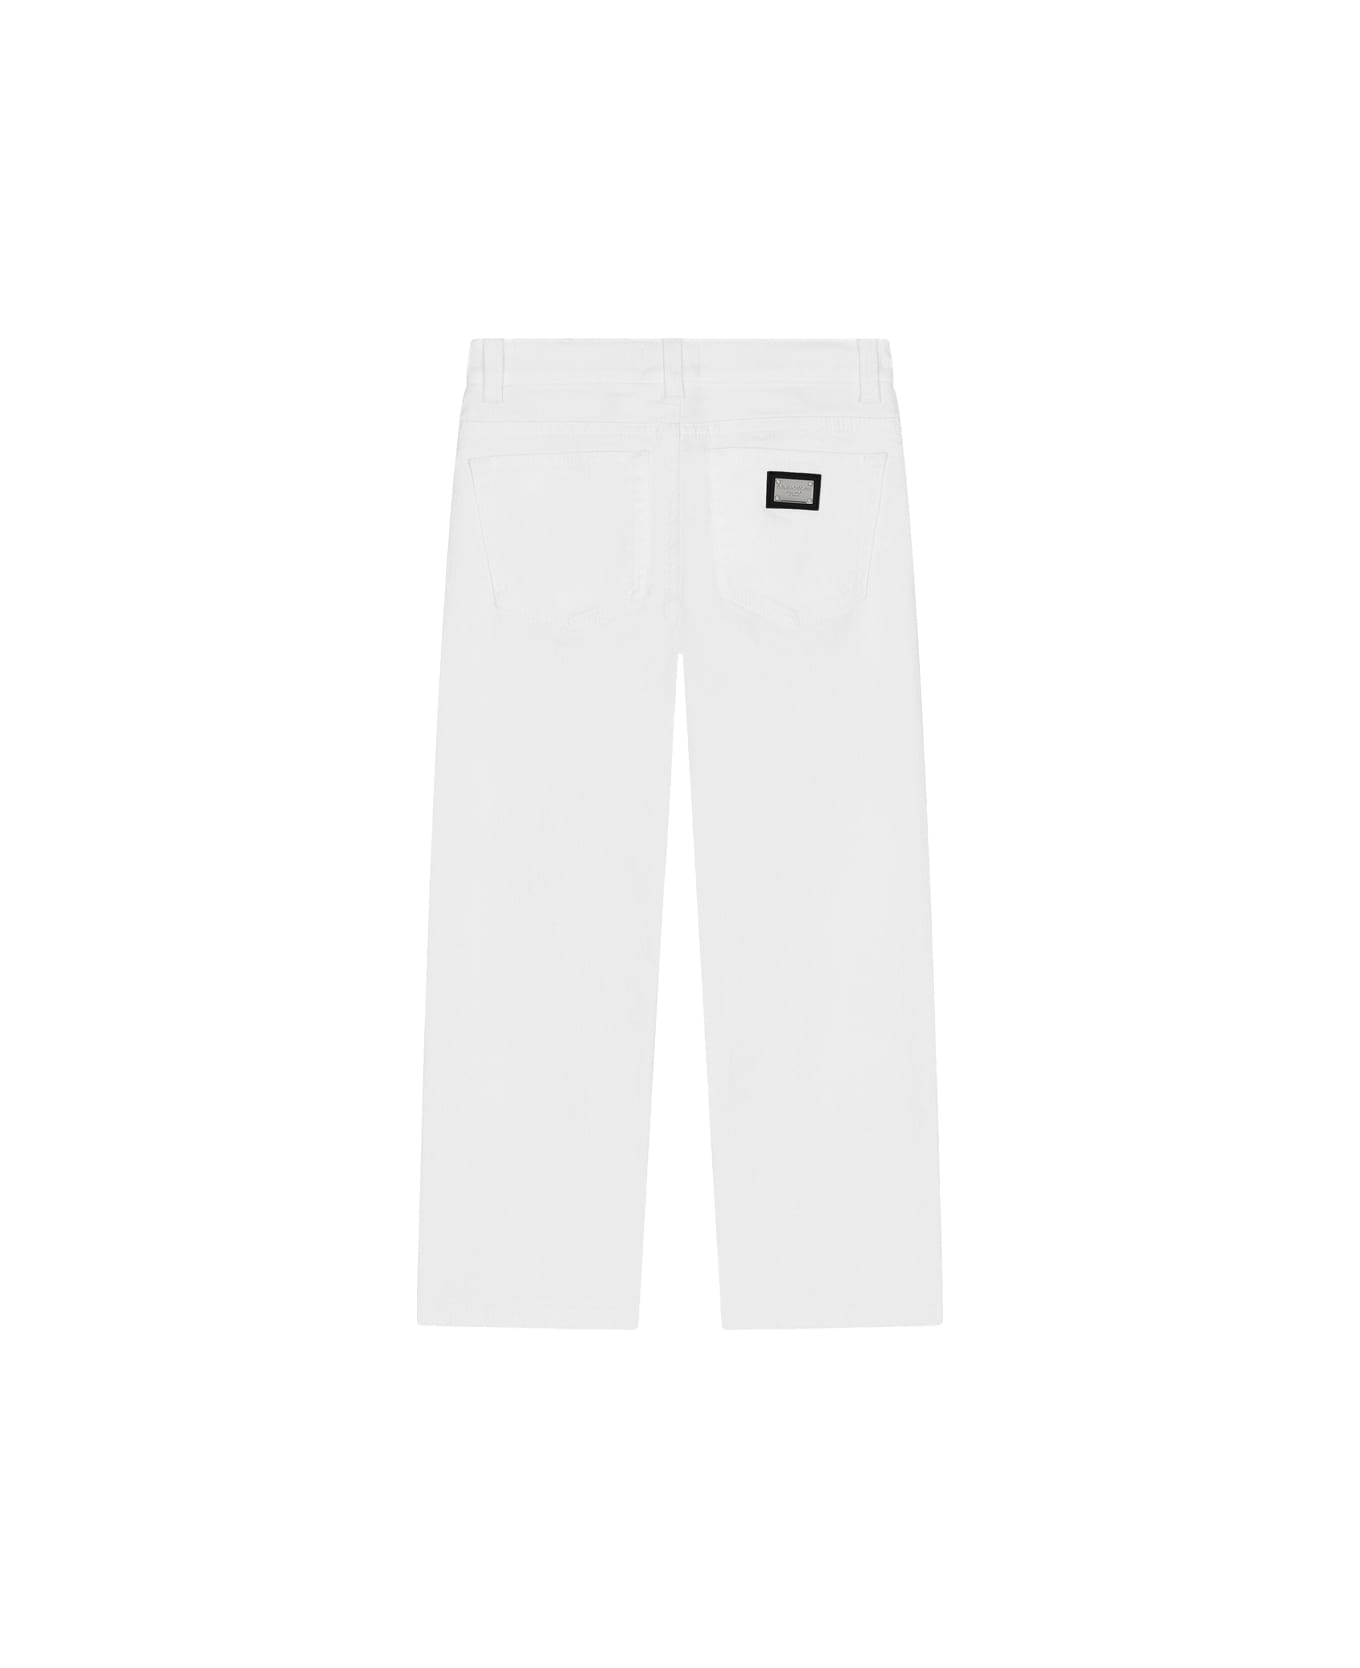 Dolce & Gabbana 5 Pocket White Denim Trousers With Tears - White ボトムス